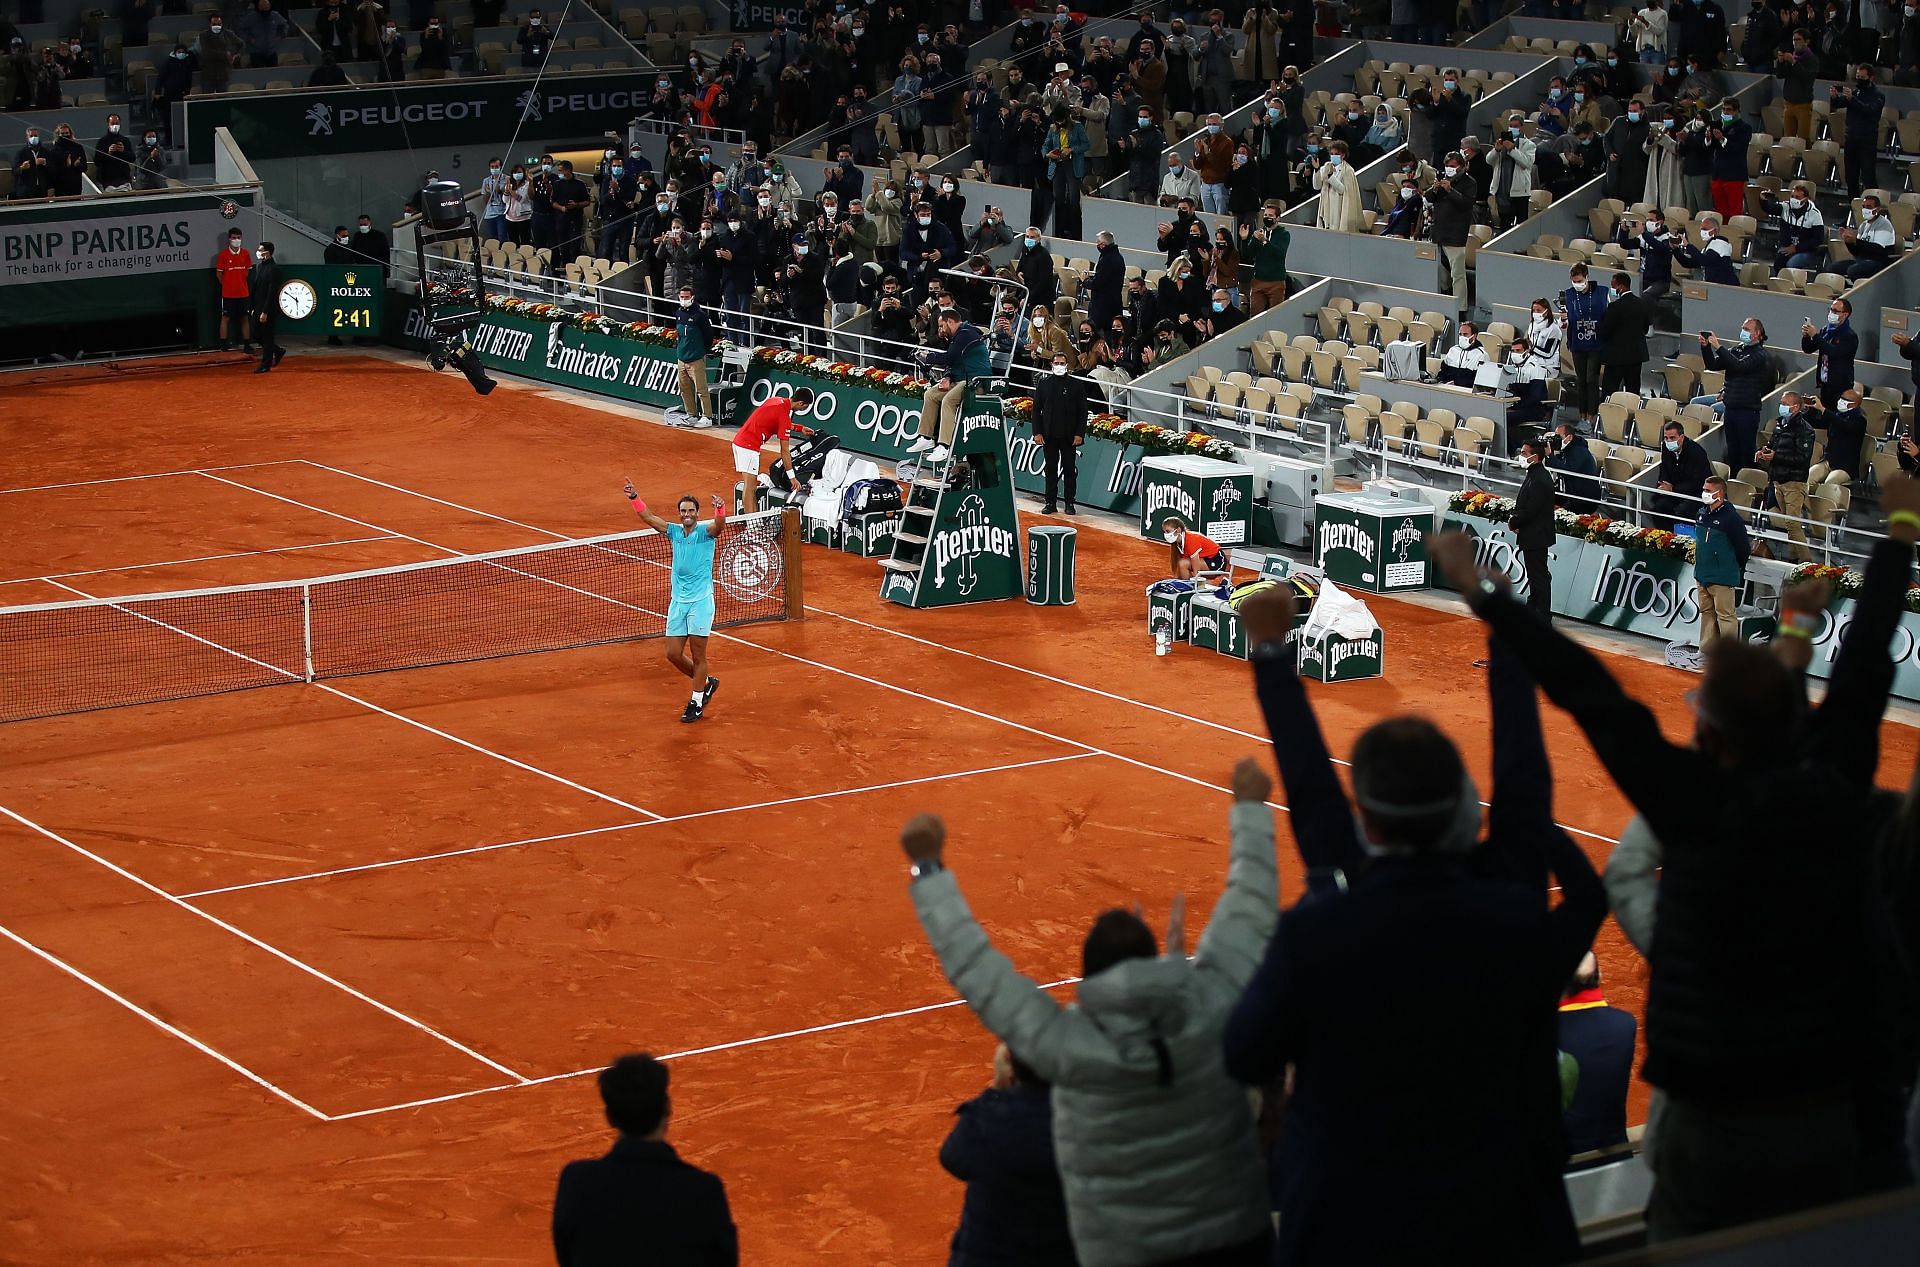 French Open - The second Grand Slam event of the year